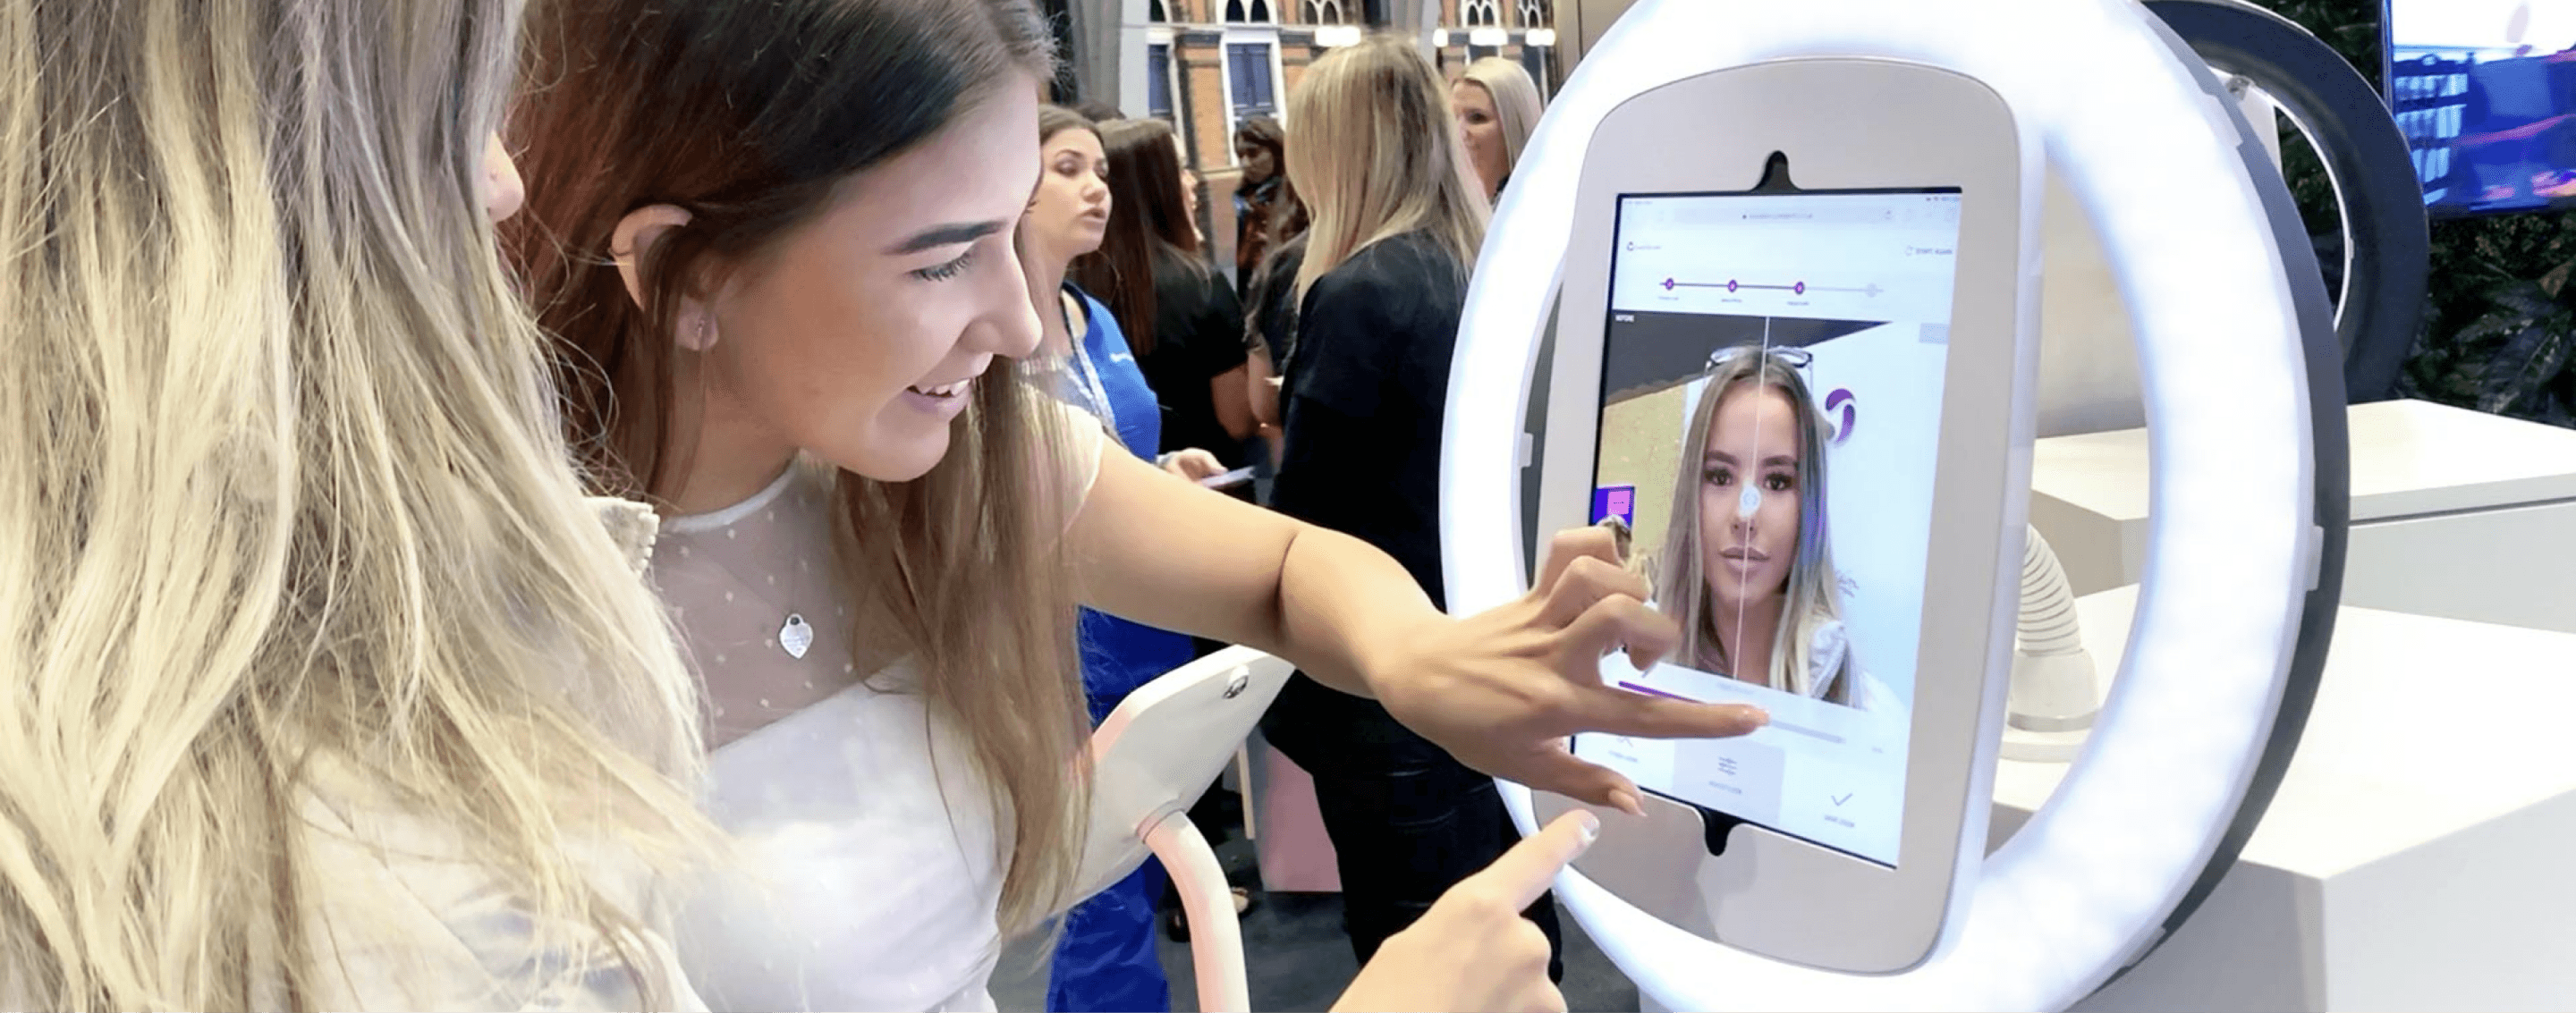 Augmented Reality makeup try-on for Allergan picture